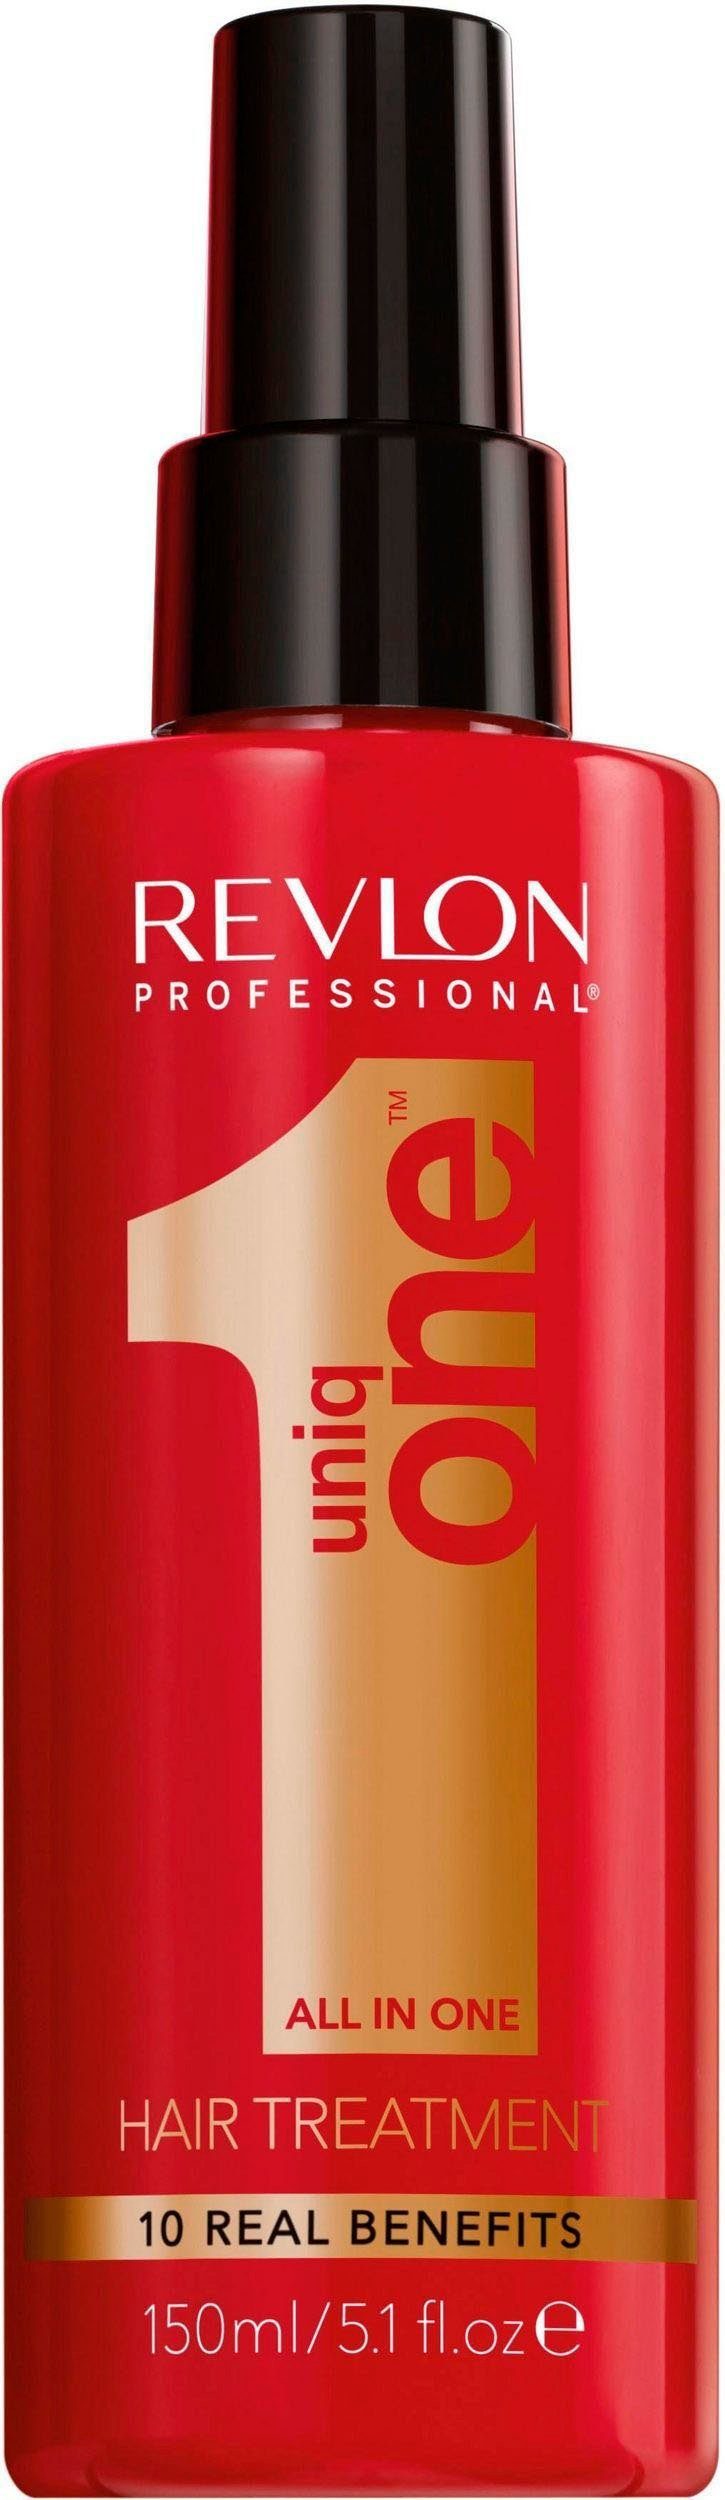 REVLON PROFESSIONAL Leave-in Pflege Uniq One All in one Hair Treatment | Haarcremes